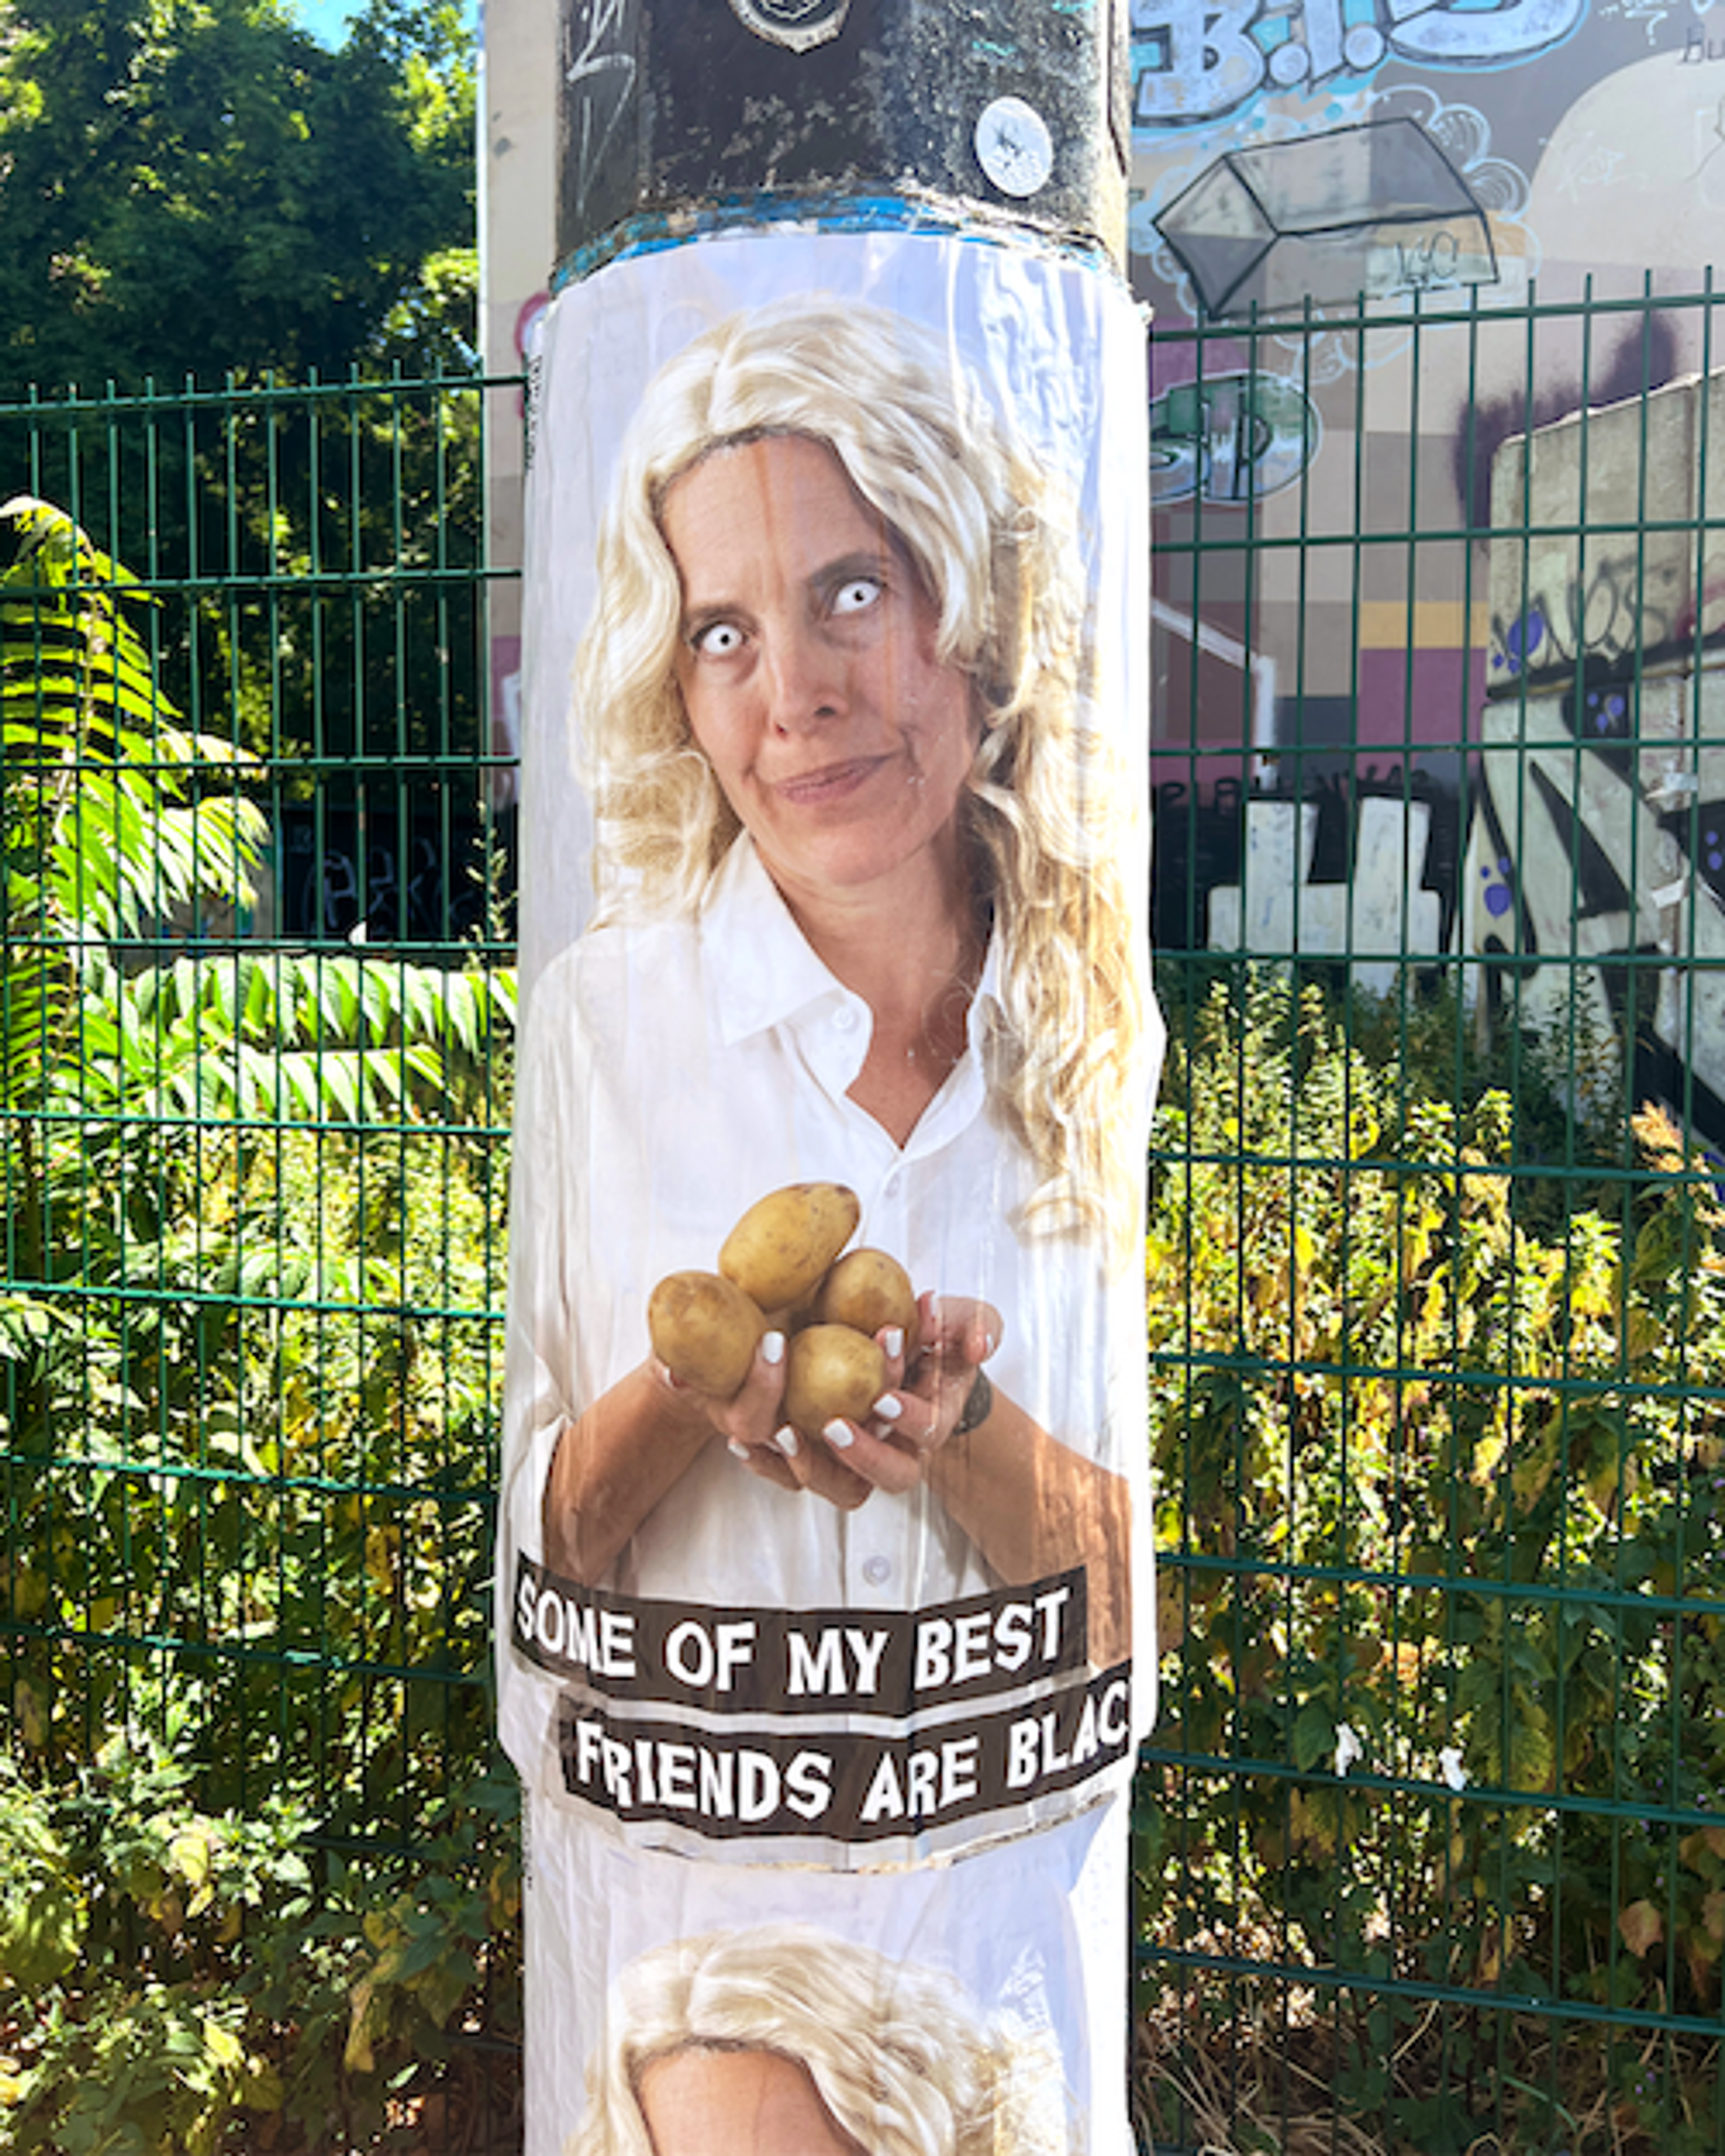 A poster on a pole featuring Candice Breitz.